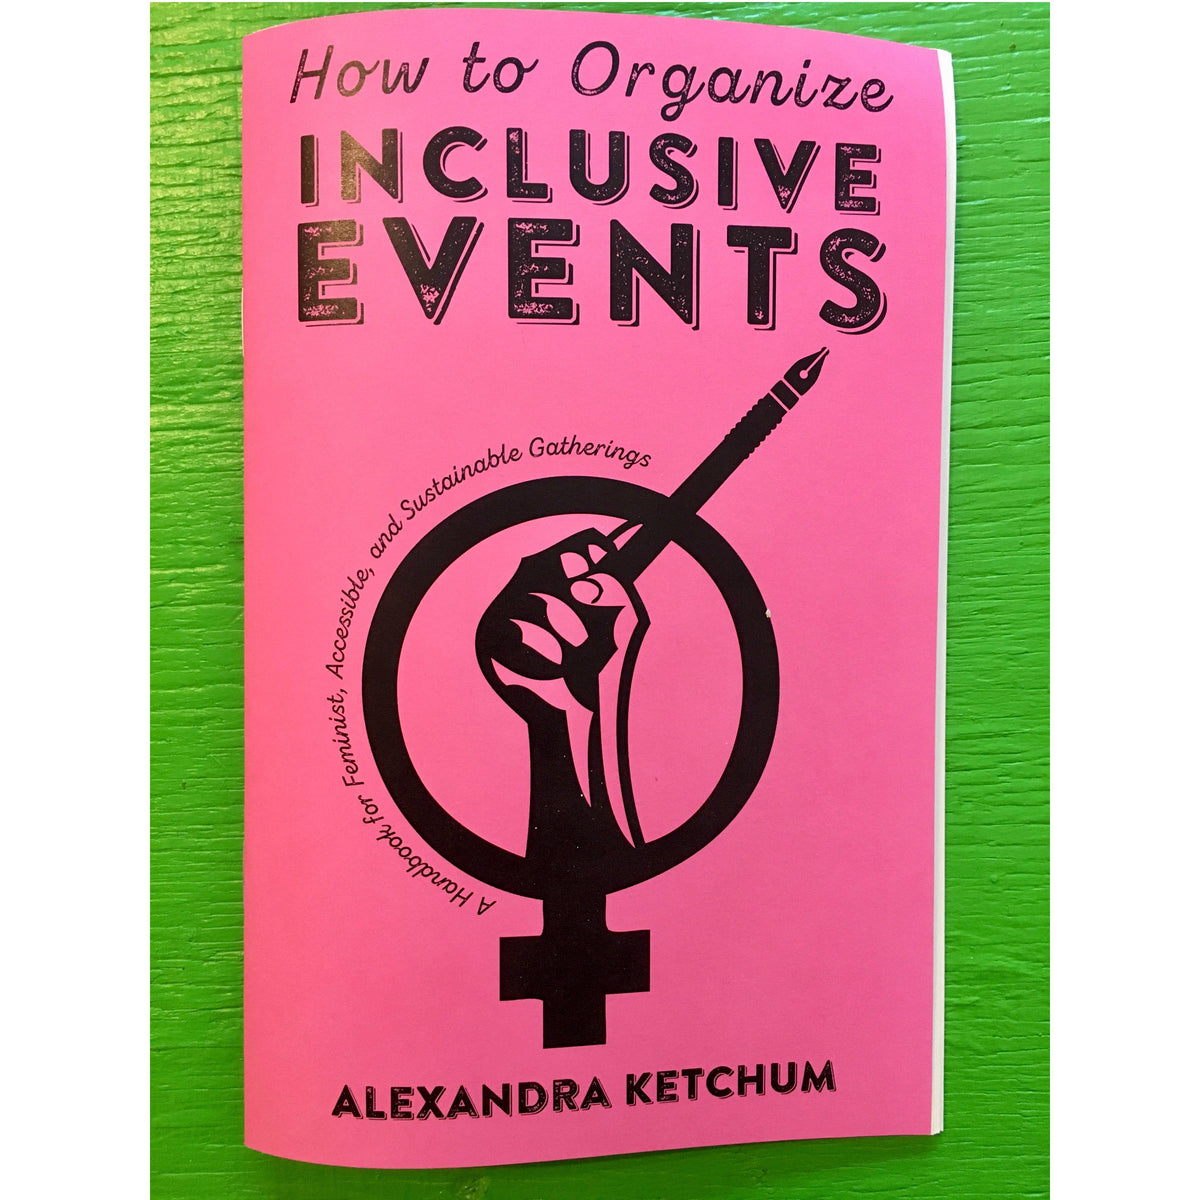 How to Organize Inclusive Events